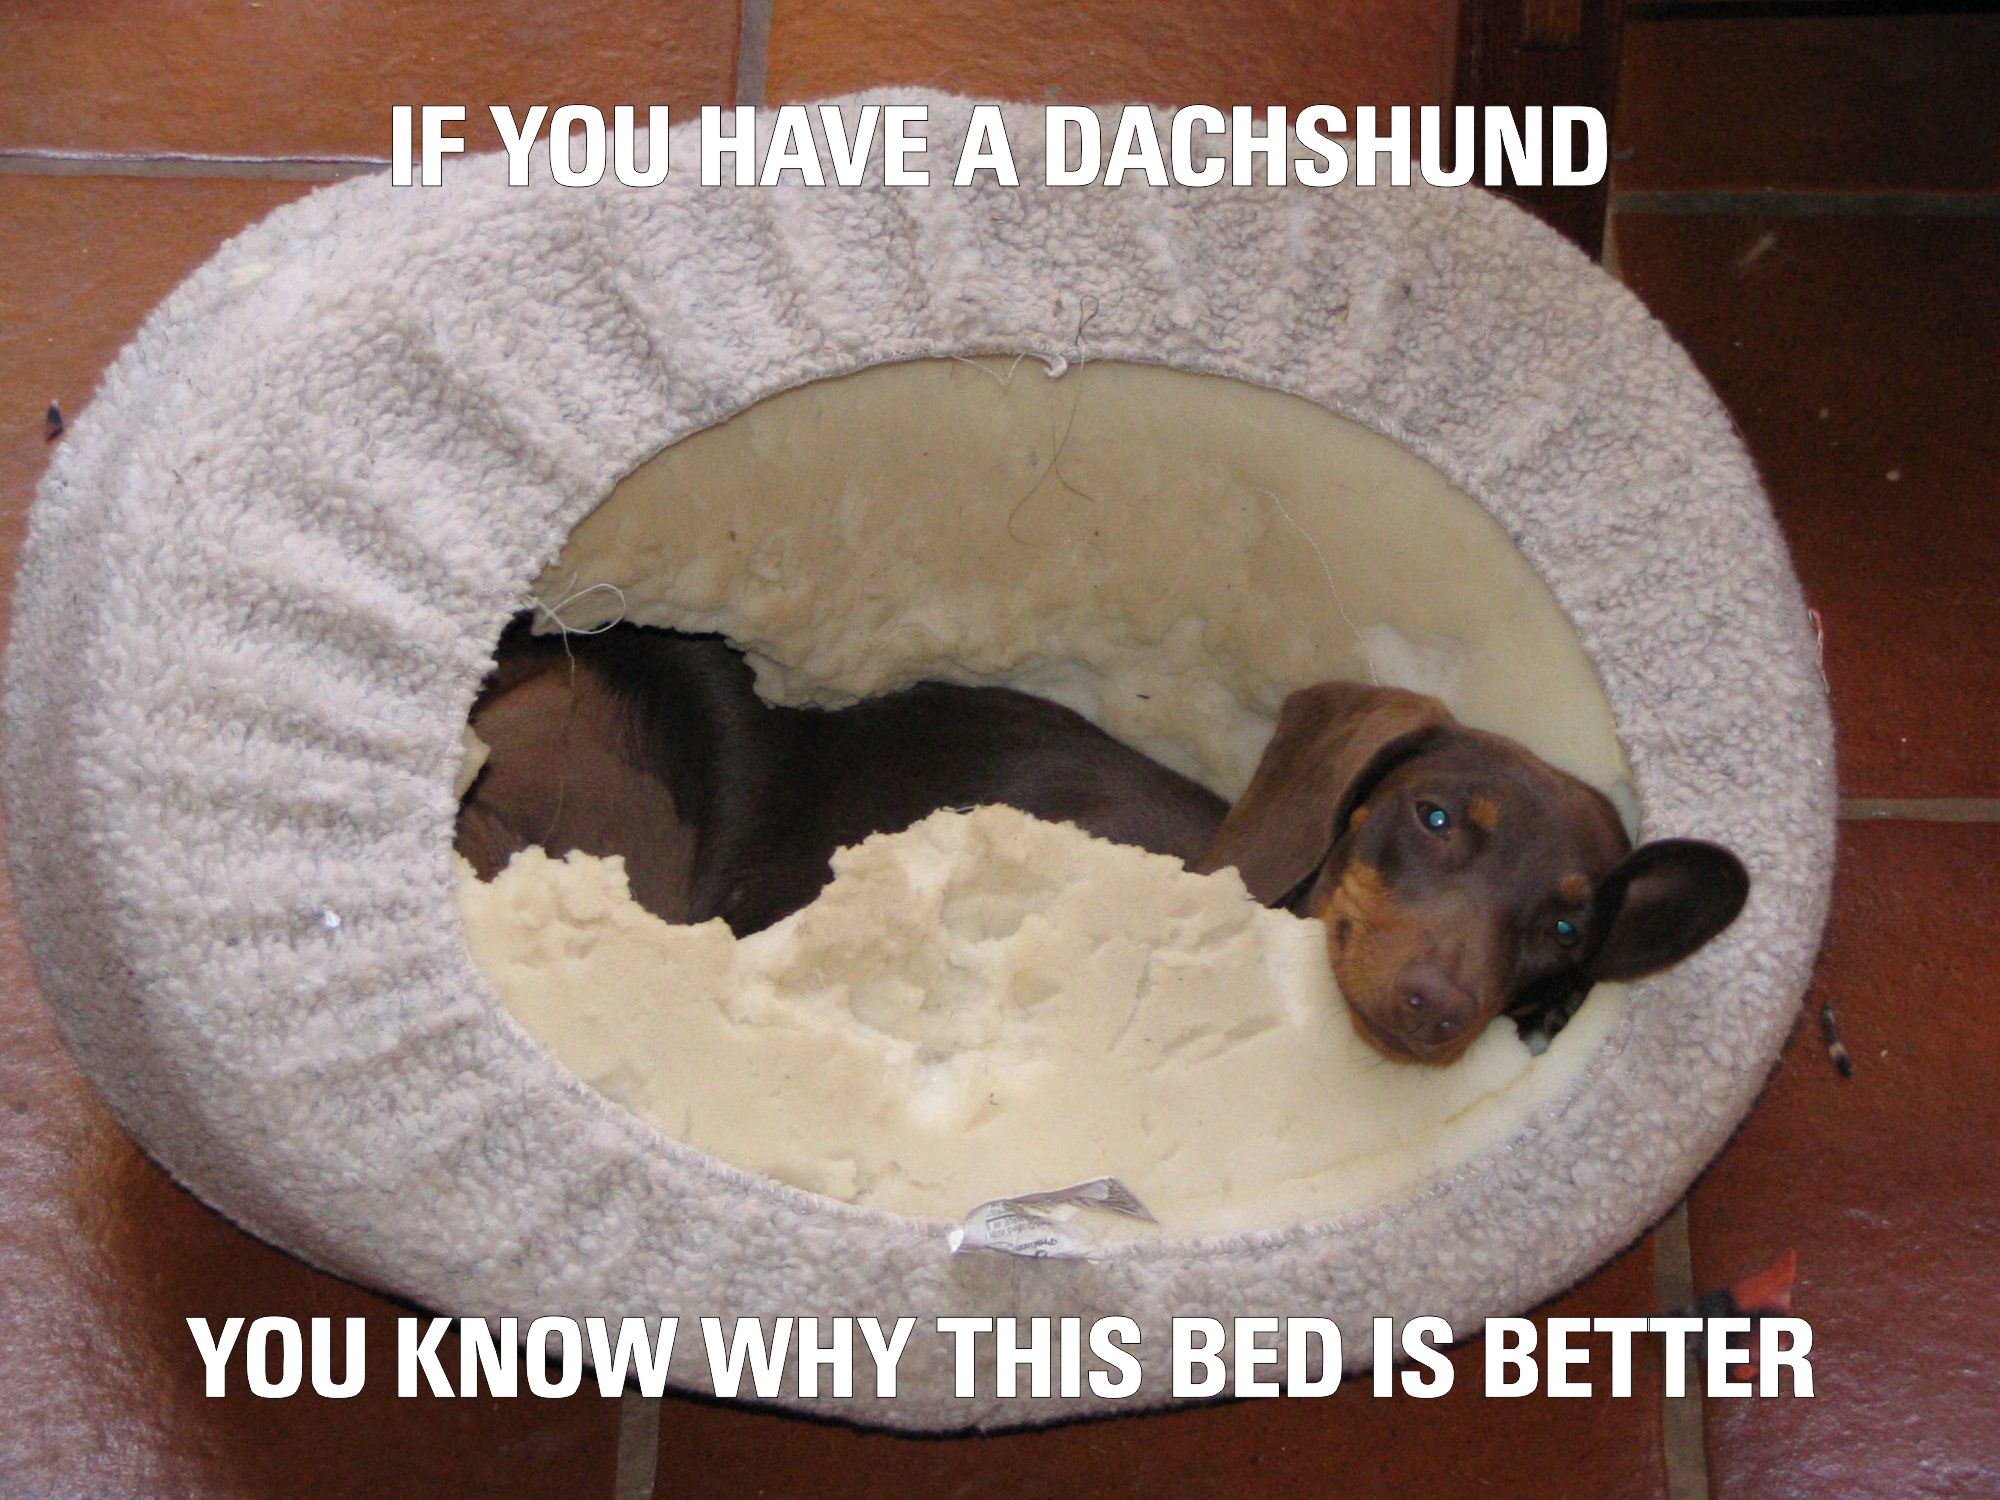 A dachshund puppy lying in an upside down dog bed